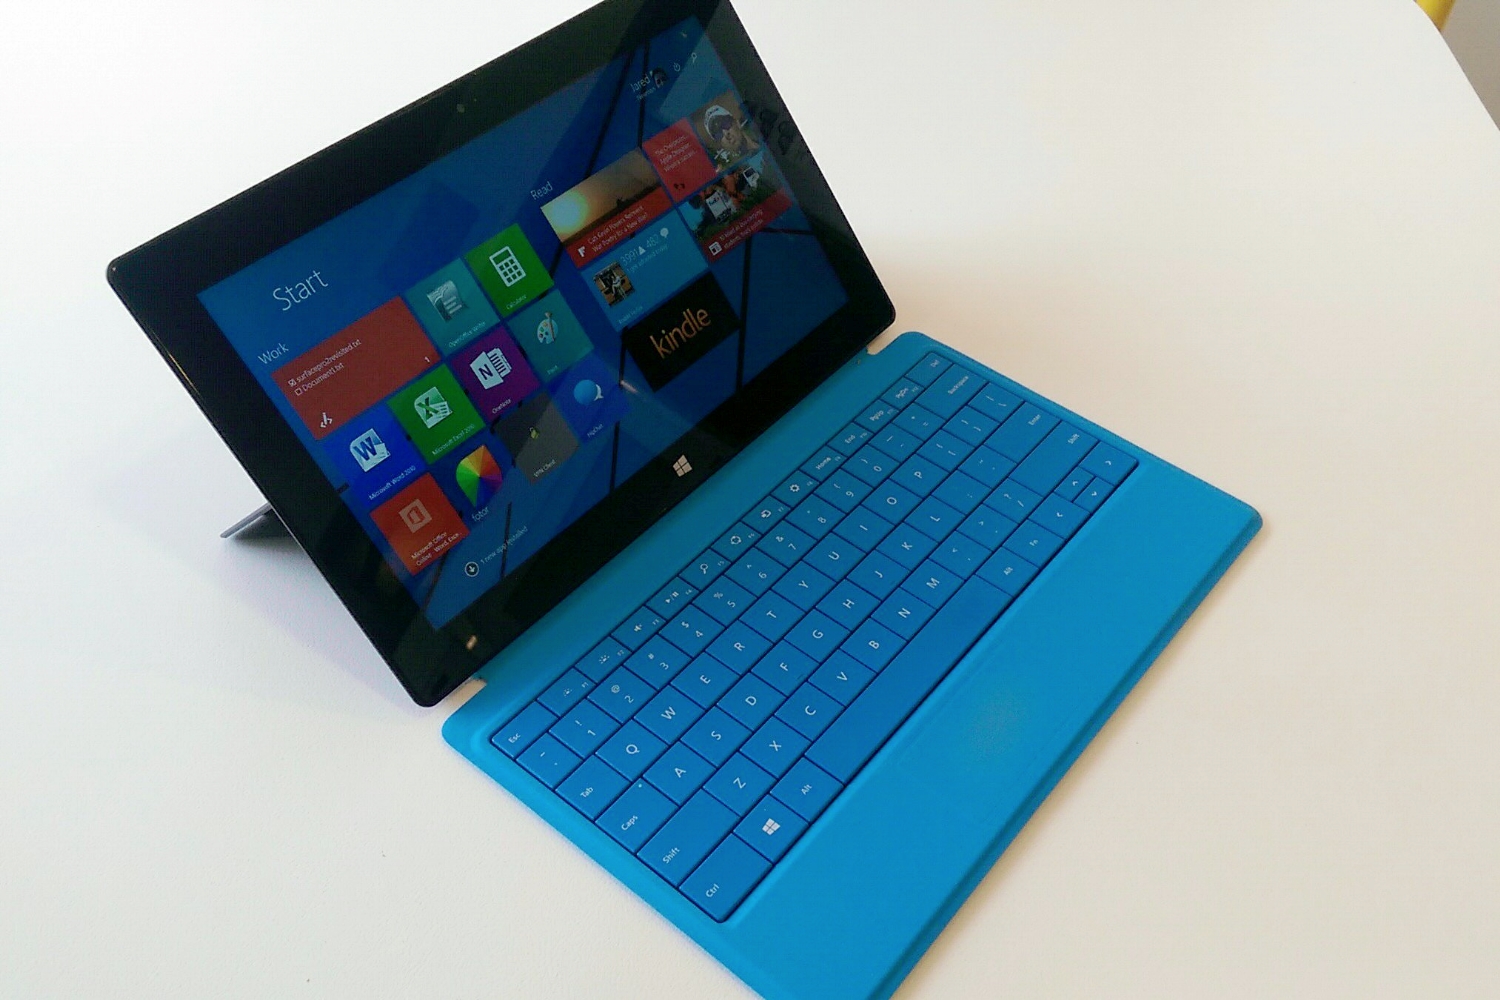 Review: Microsoft Surface Pro 2 with Windows 8.1 | Time